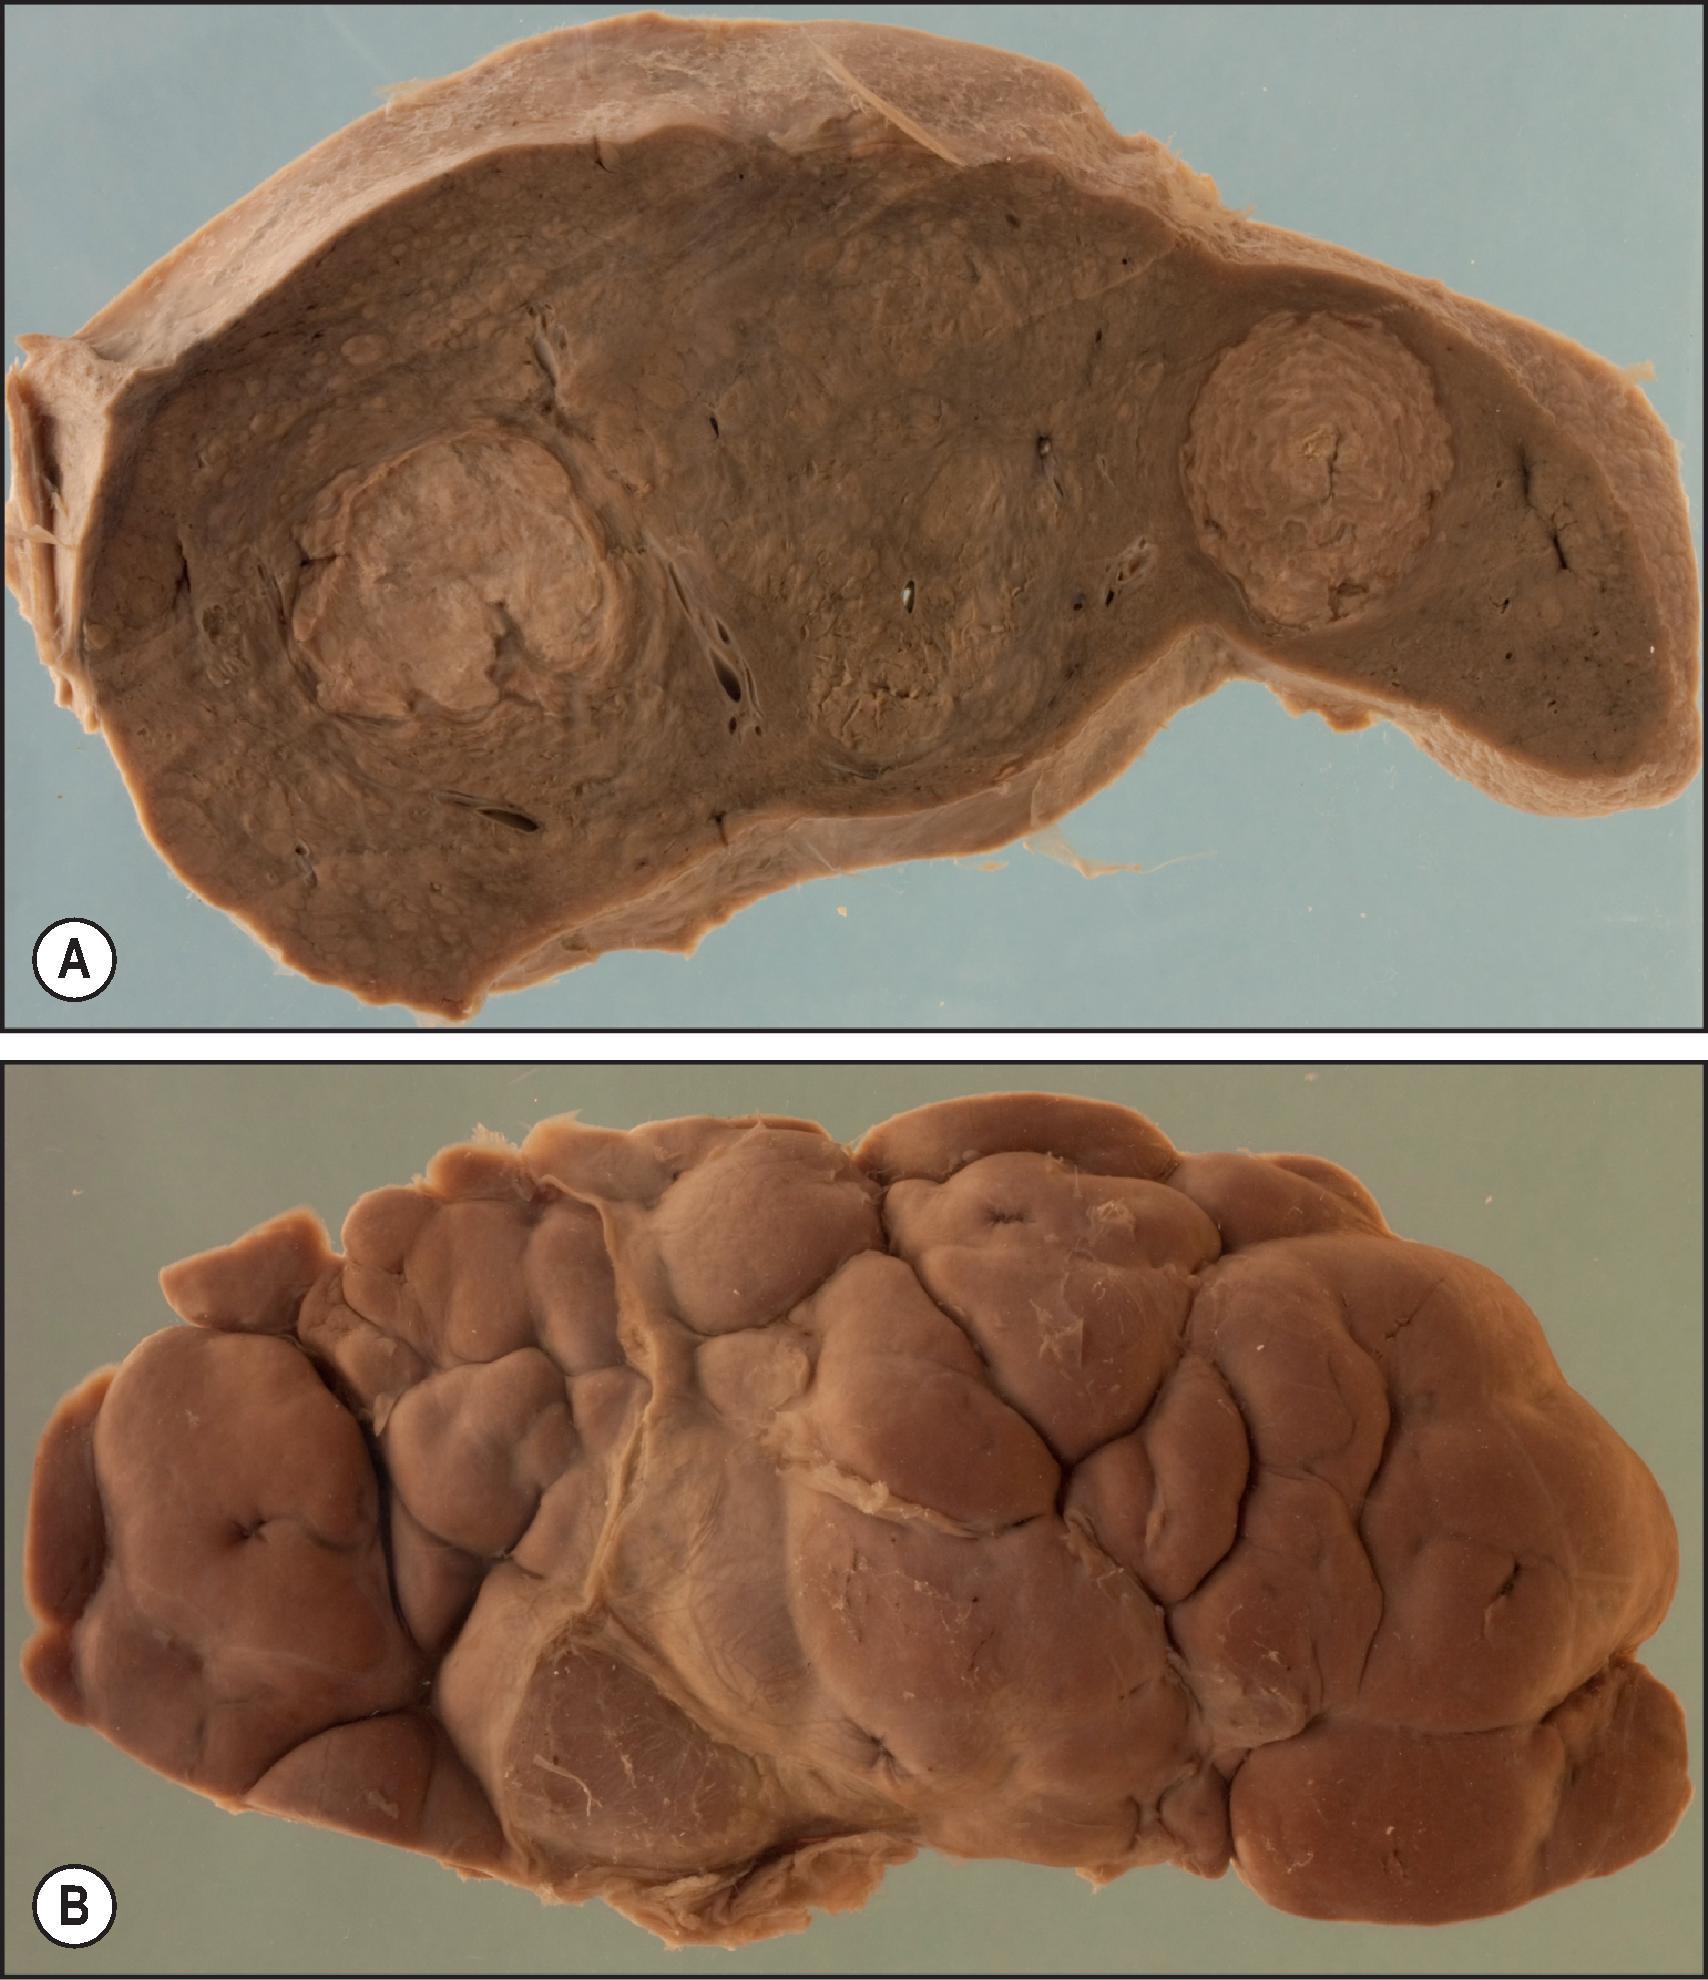 Figure 7.38, Tertiary syphilis. (A) Coronal liver section showing two particularly large gummas. (B) Fibrous healing has produced the deep fissures and coarse nodularity of hepar lobatum.